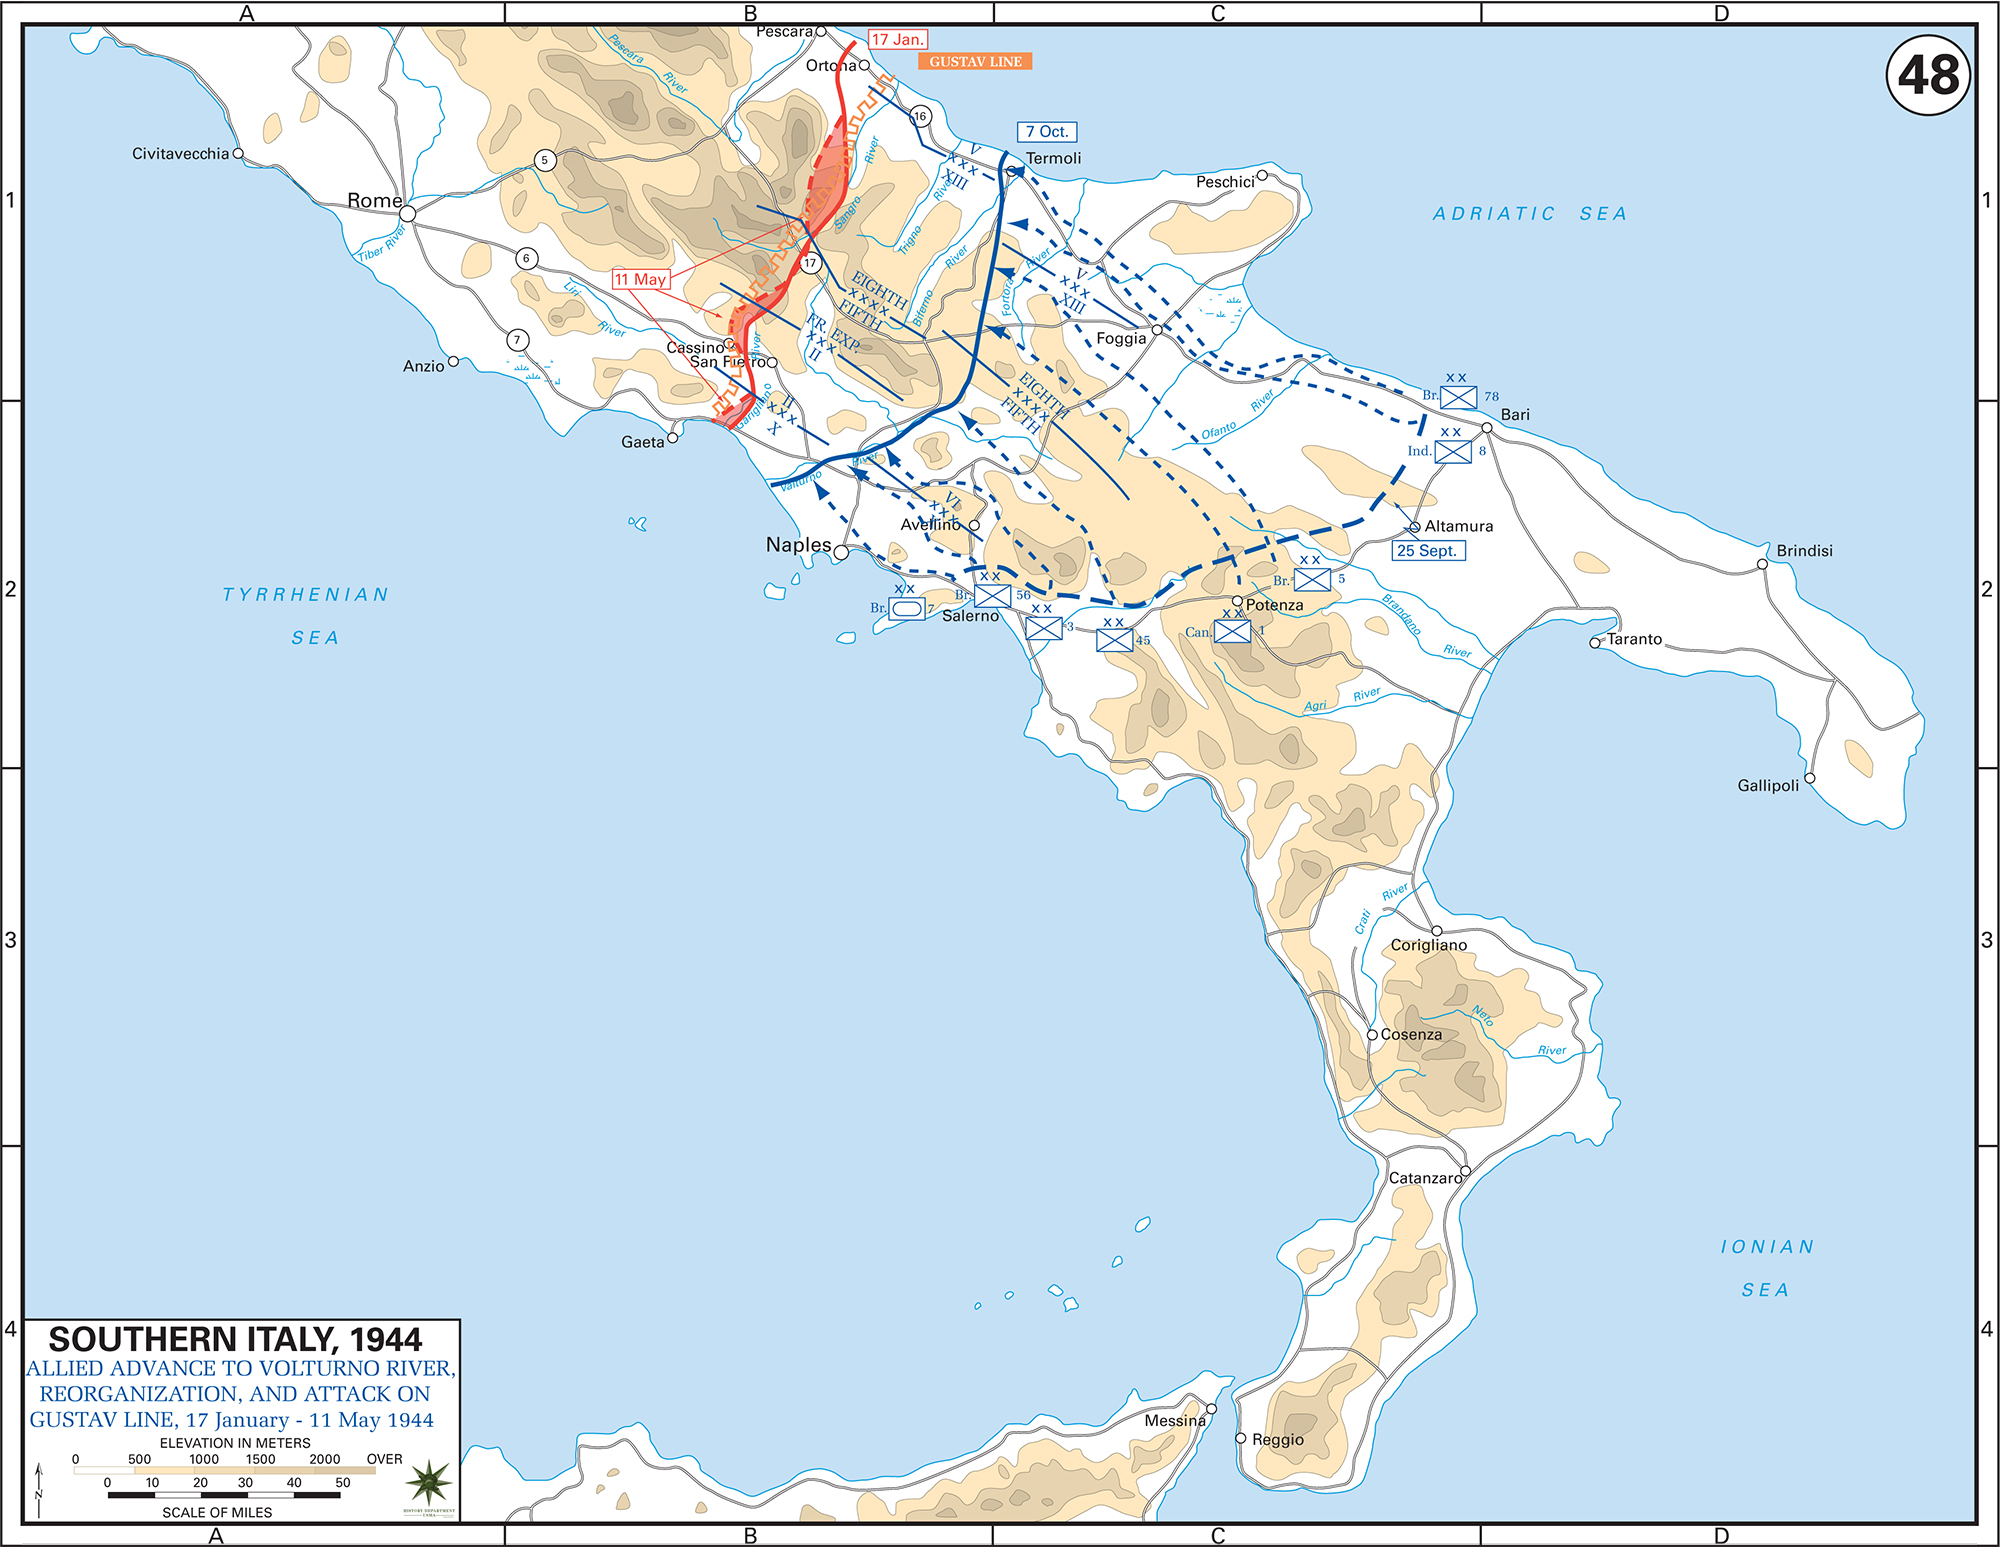 Map of WWII Southern Italy, January 17 - May 11, 1944